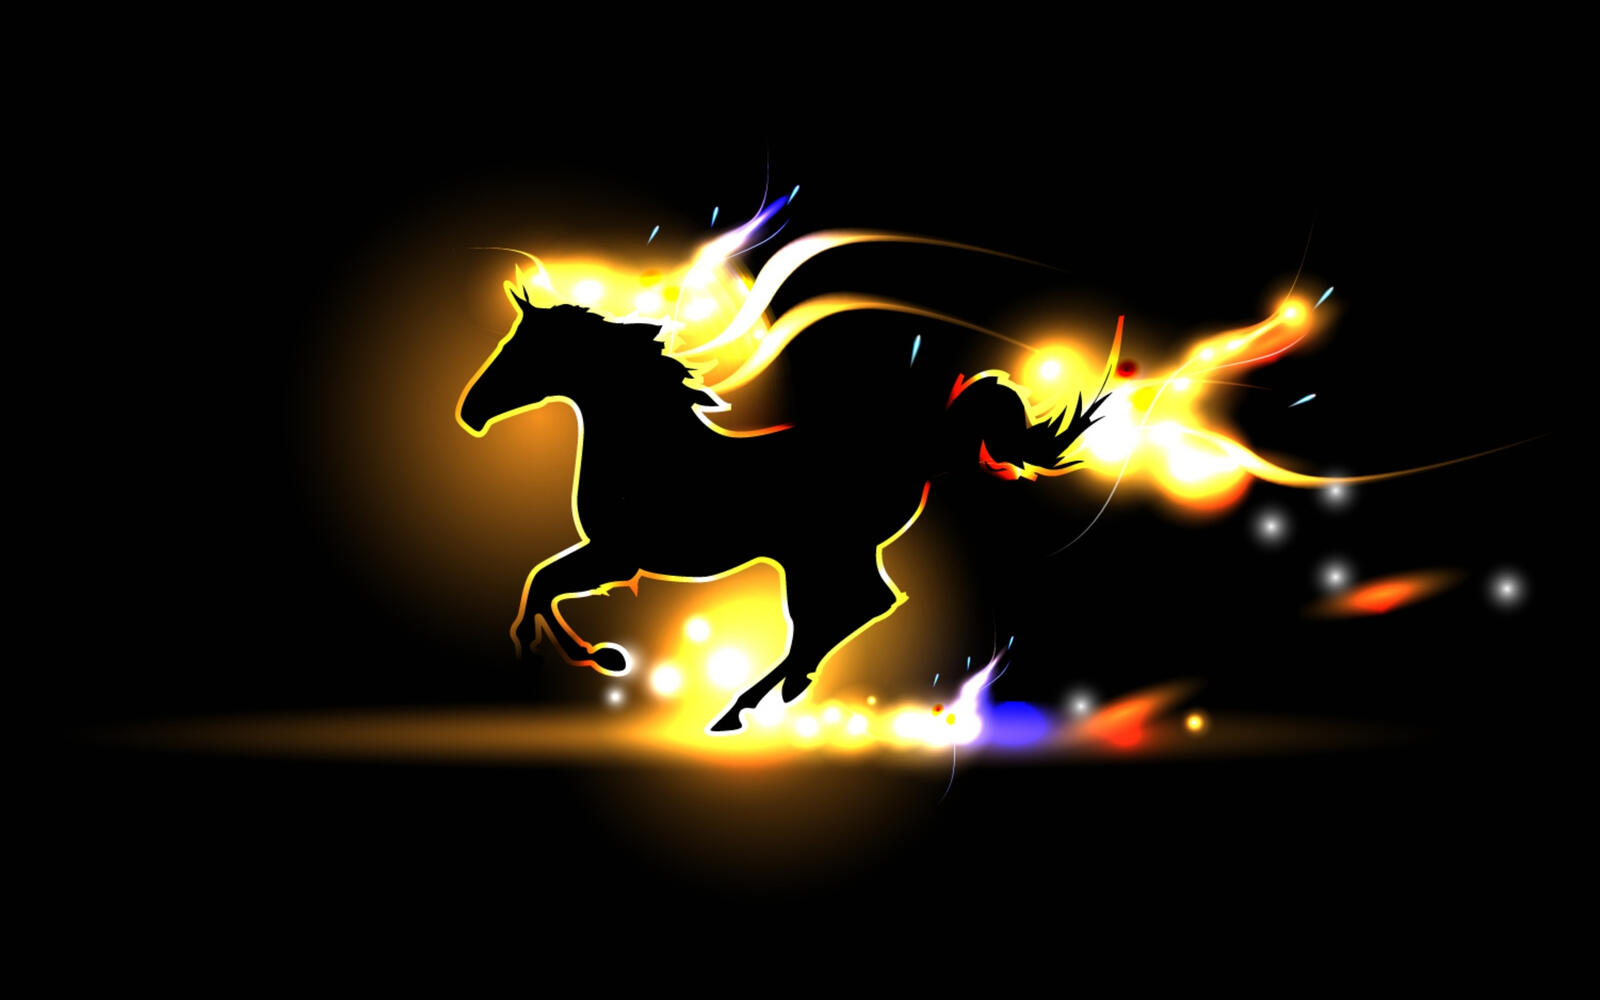 Wallpapers horse silhouette shadow on the desktop